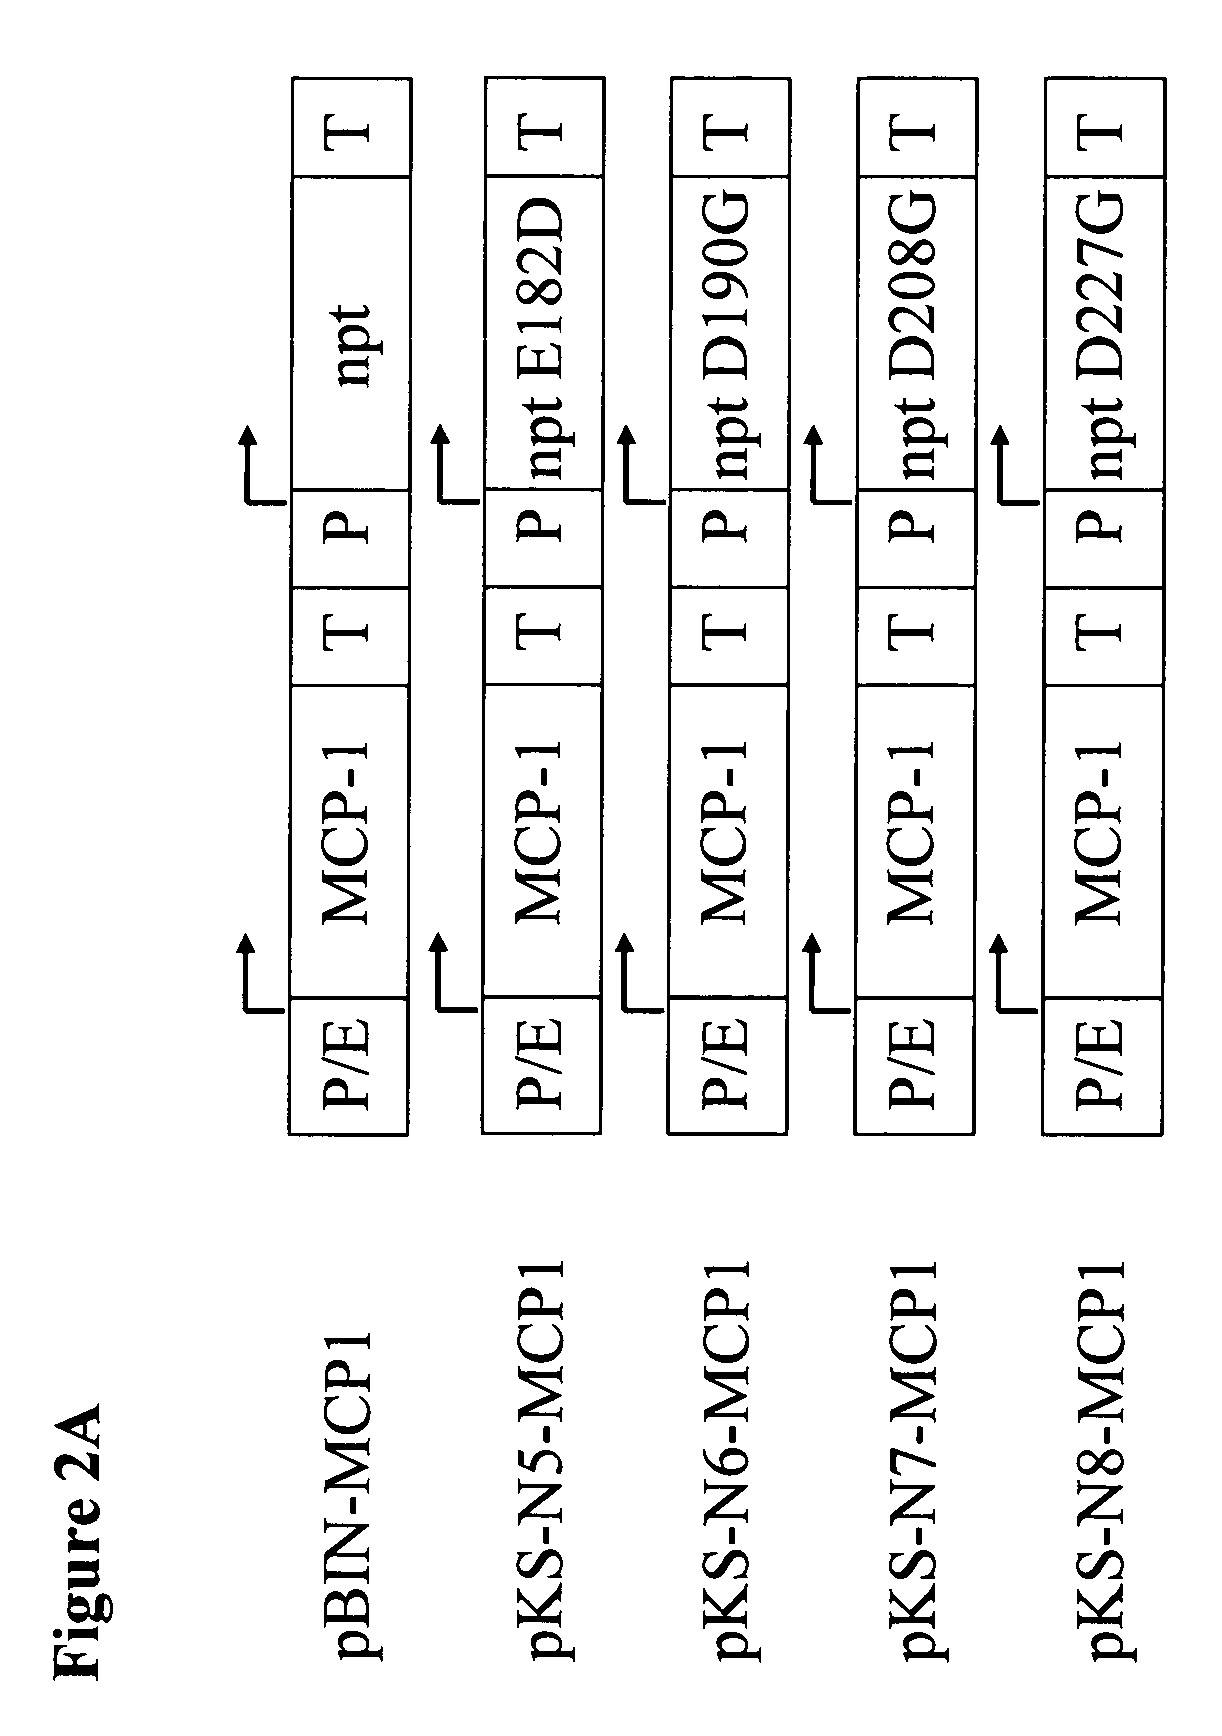 Neomycin-phosphotransferase-genes and methods for the selection of recombinant cells producing high levels of a desired gene product